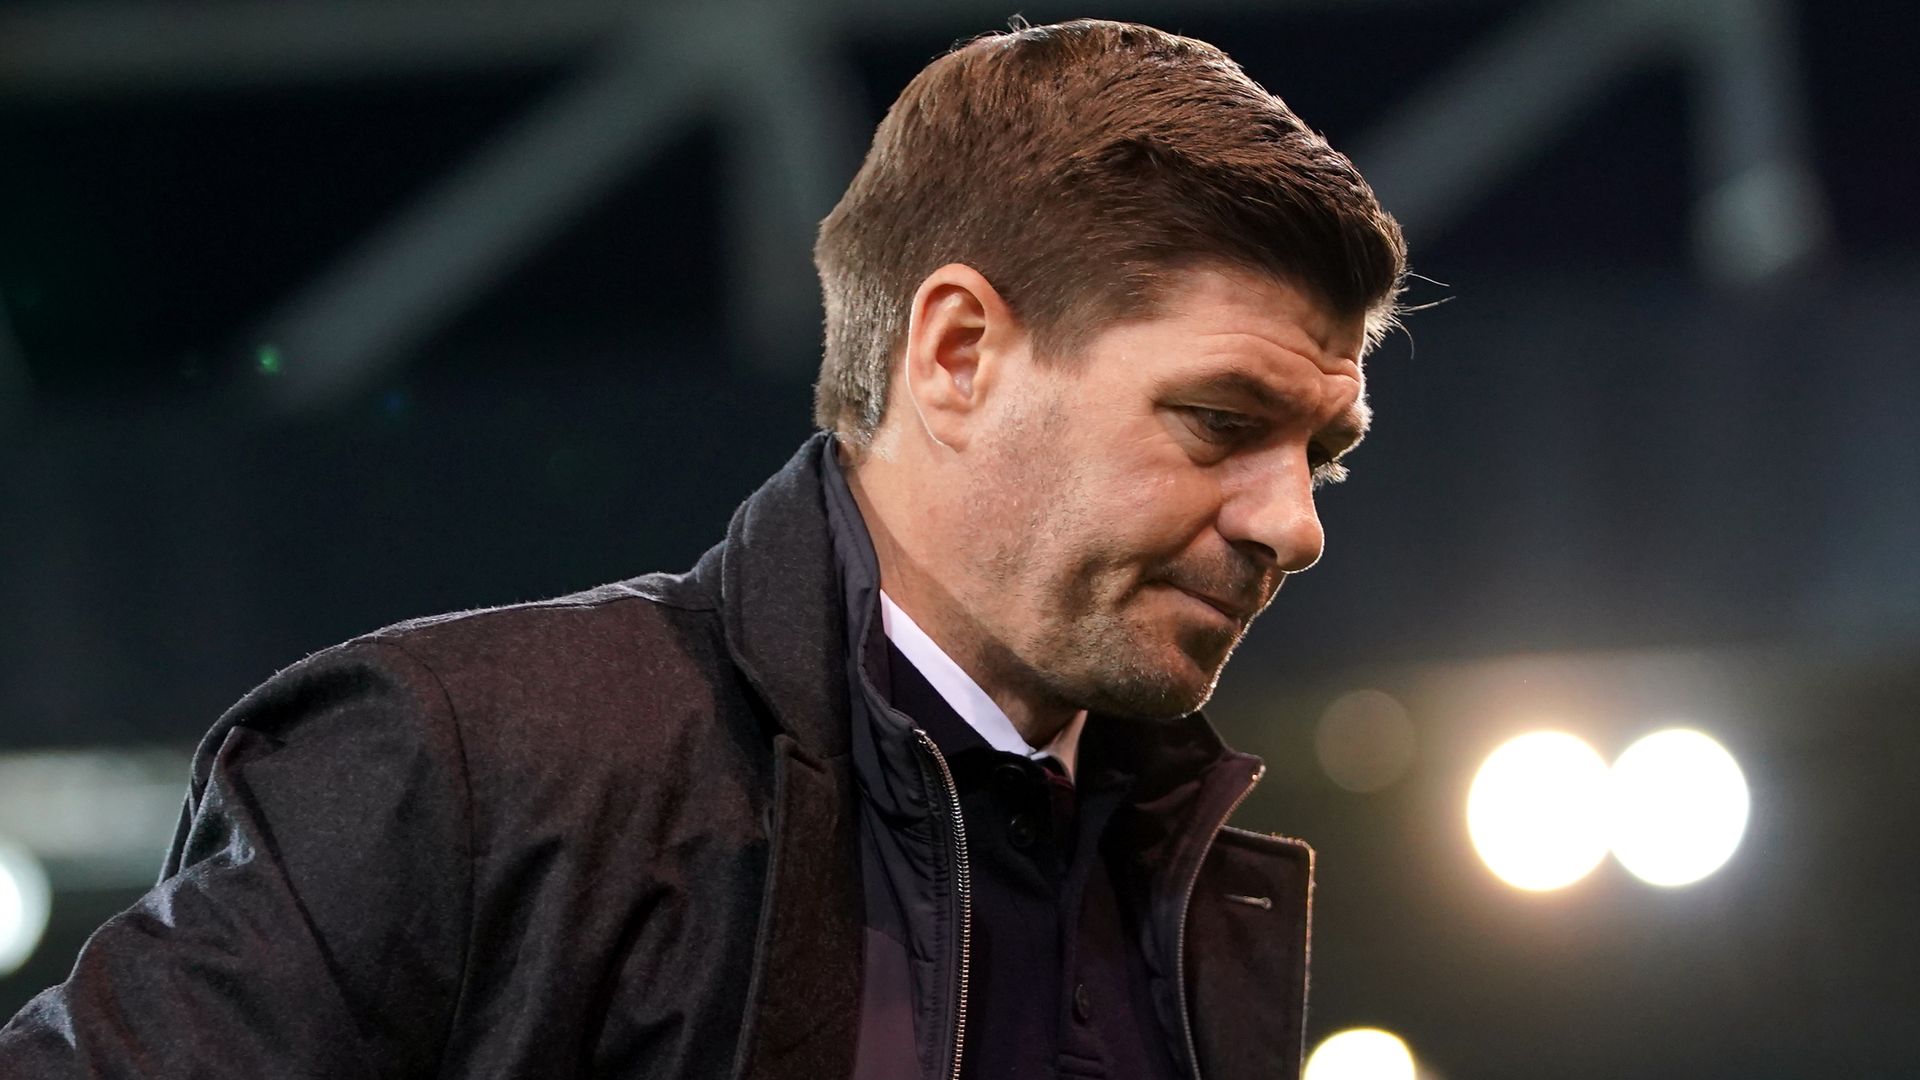 Gerrard to miss Villa games after positive Covid-19 test